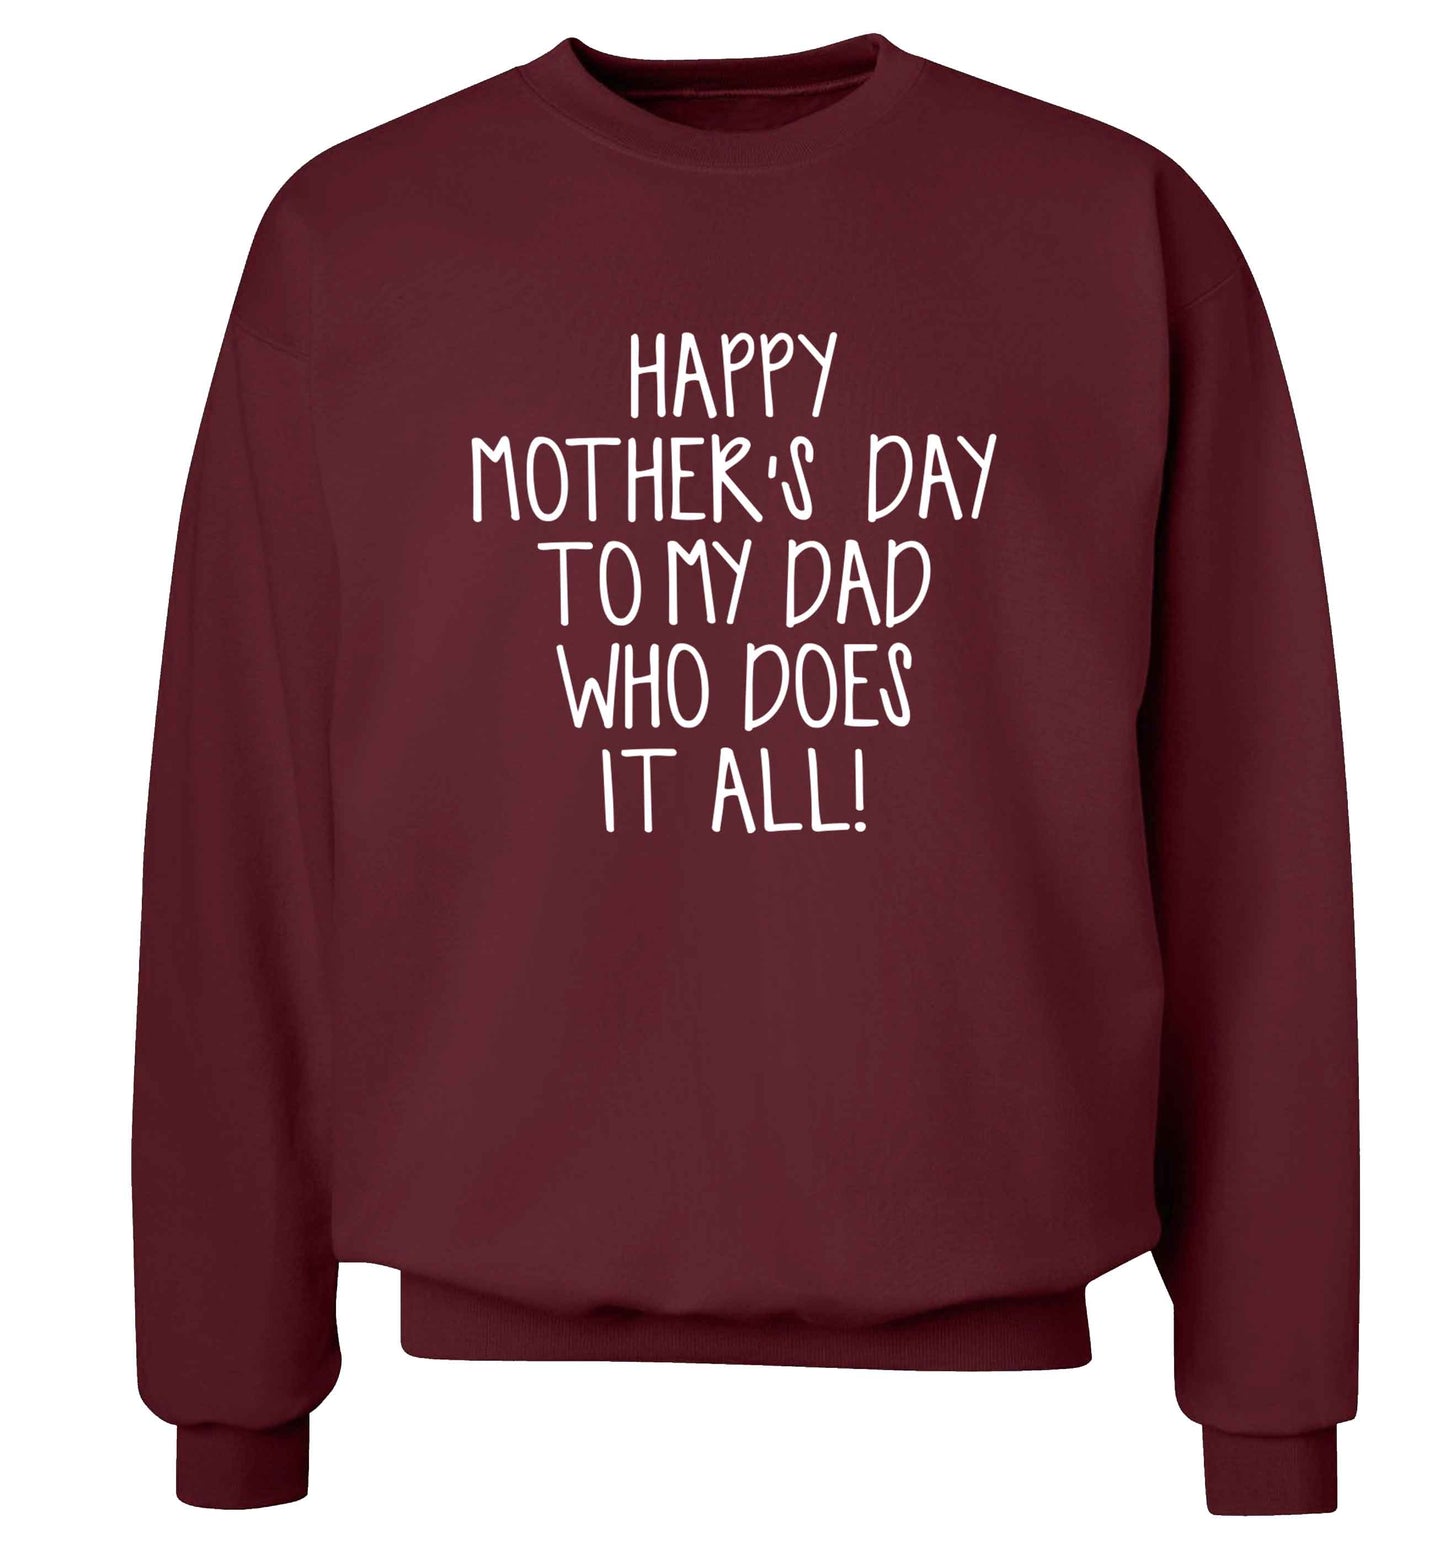 Happy mother's day to my dad who does it all! adult's unisex maroon sweater 2XL